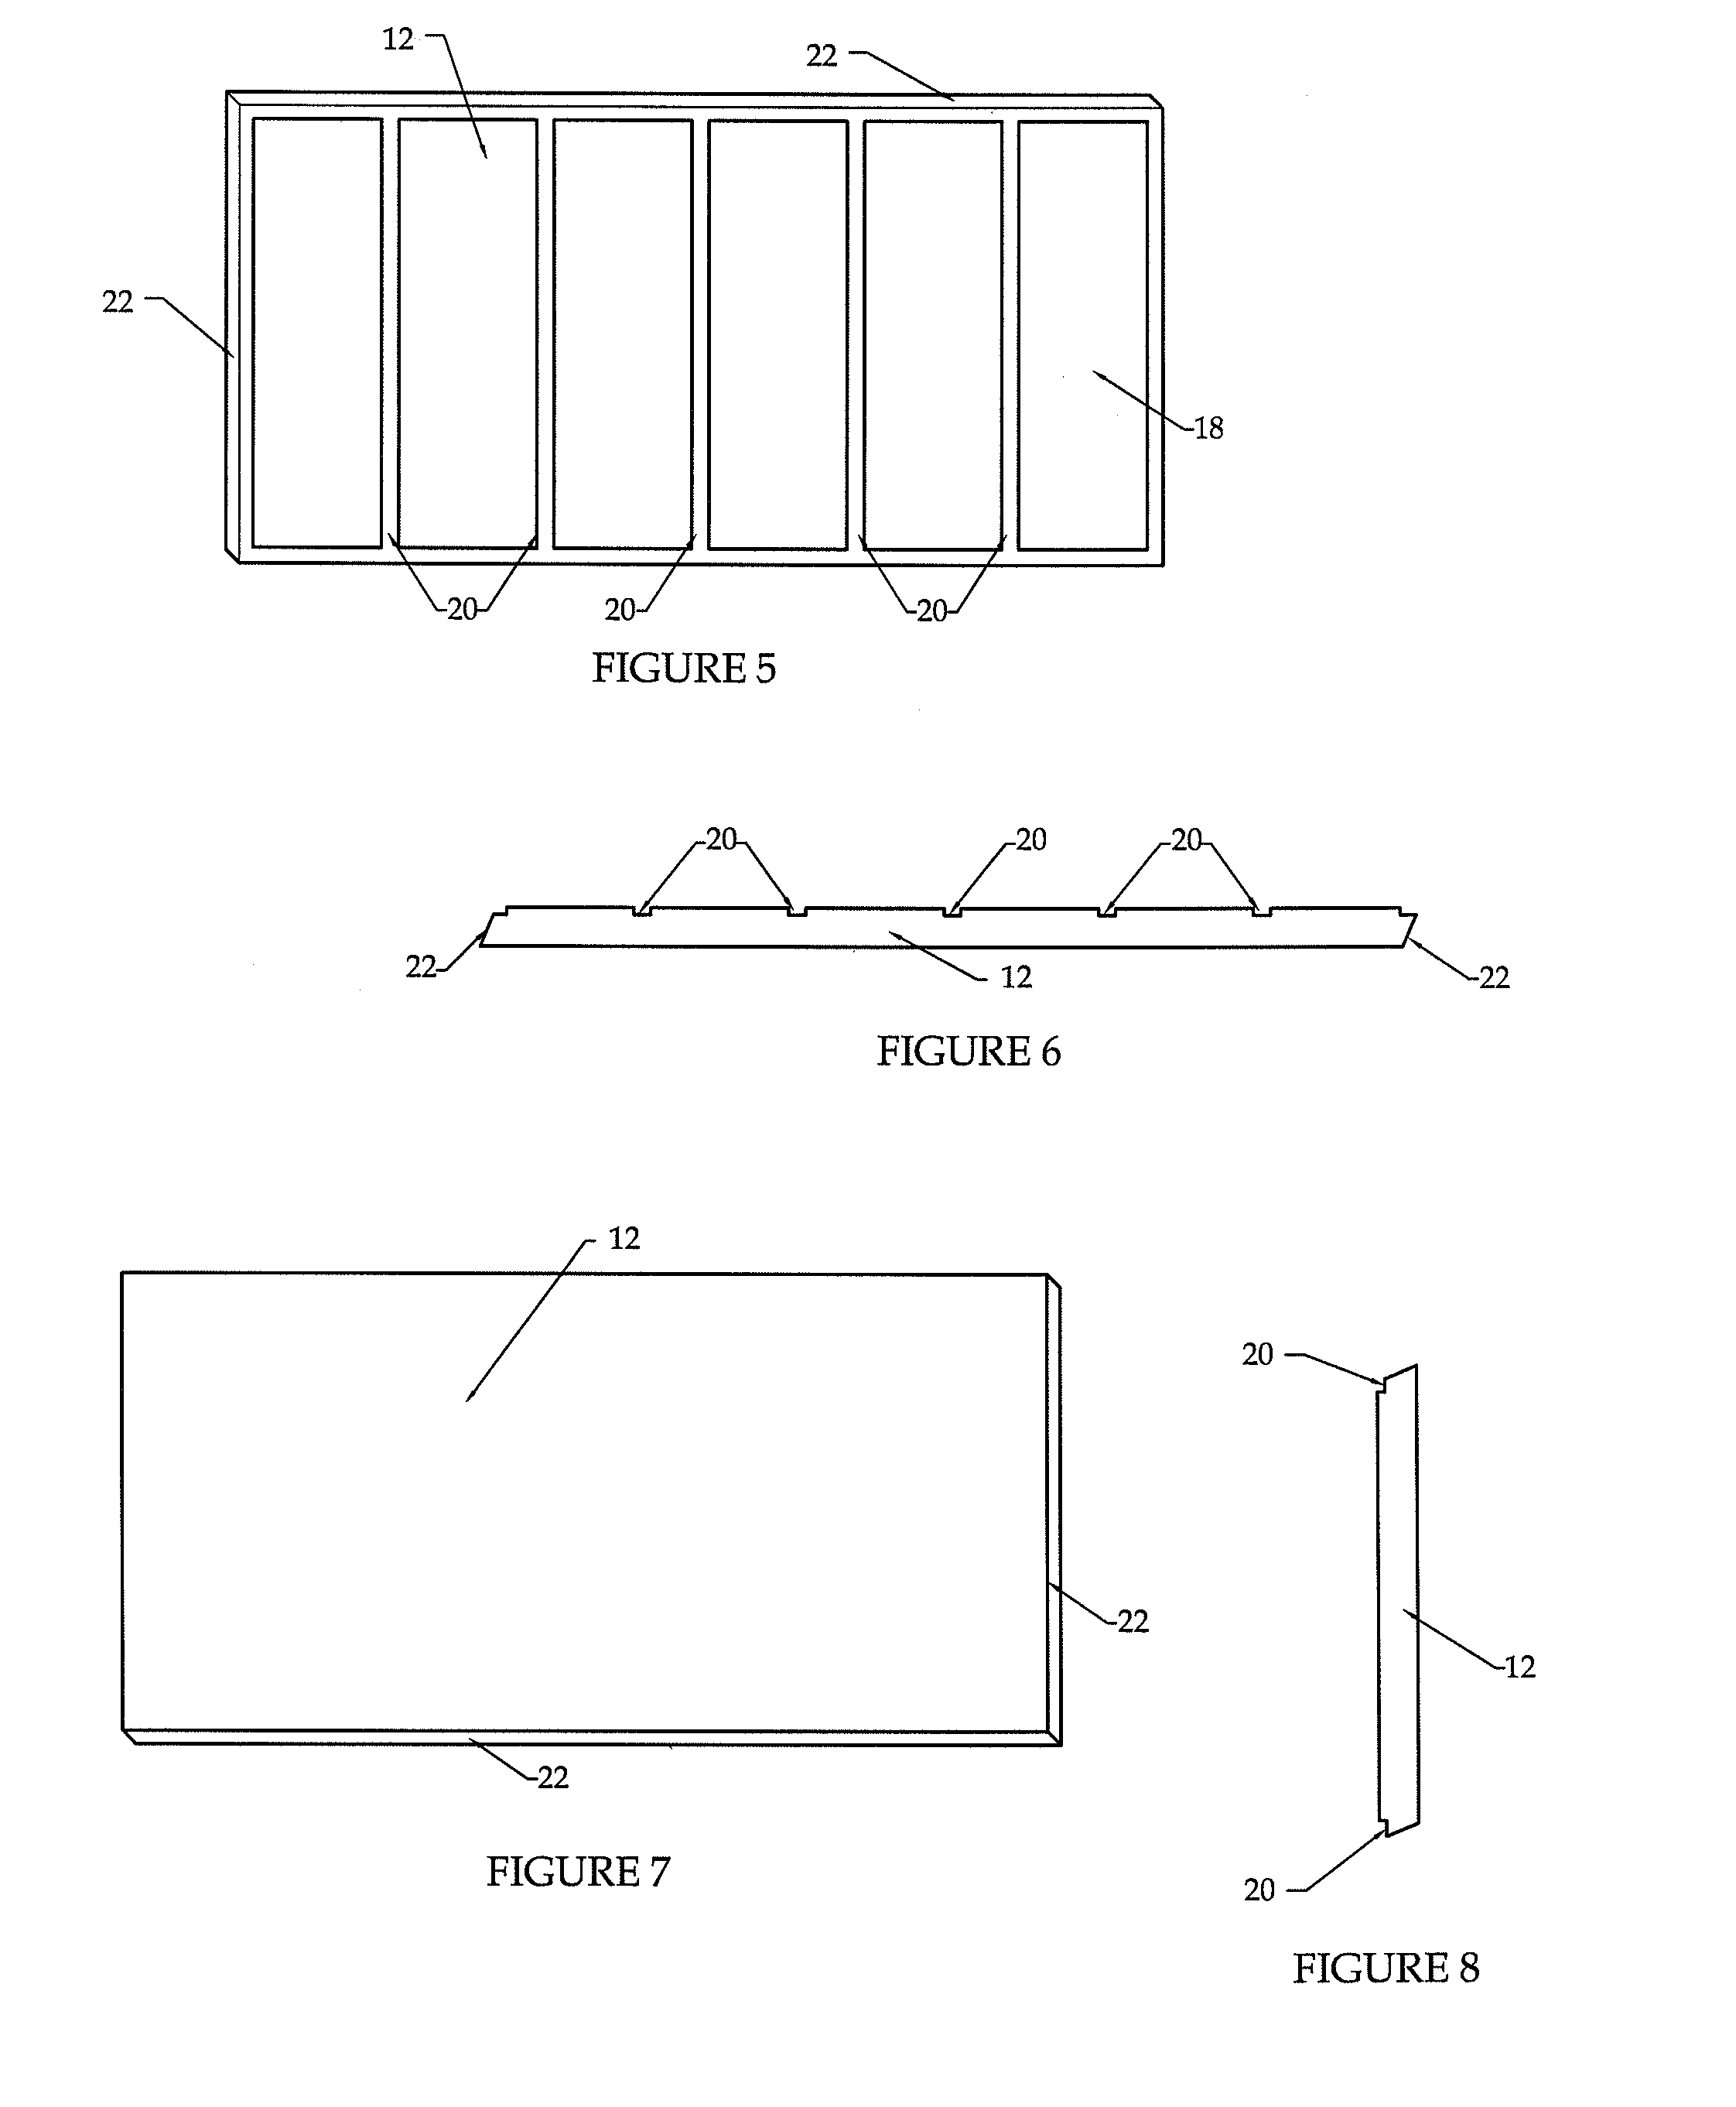 Building Insulation Sheathing Systems and Methods of Use Thereof